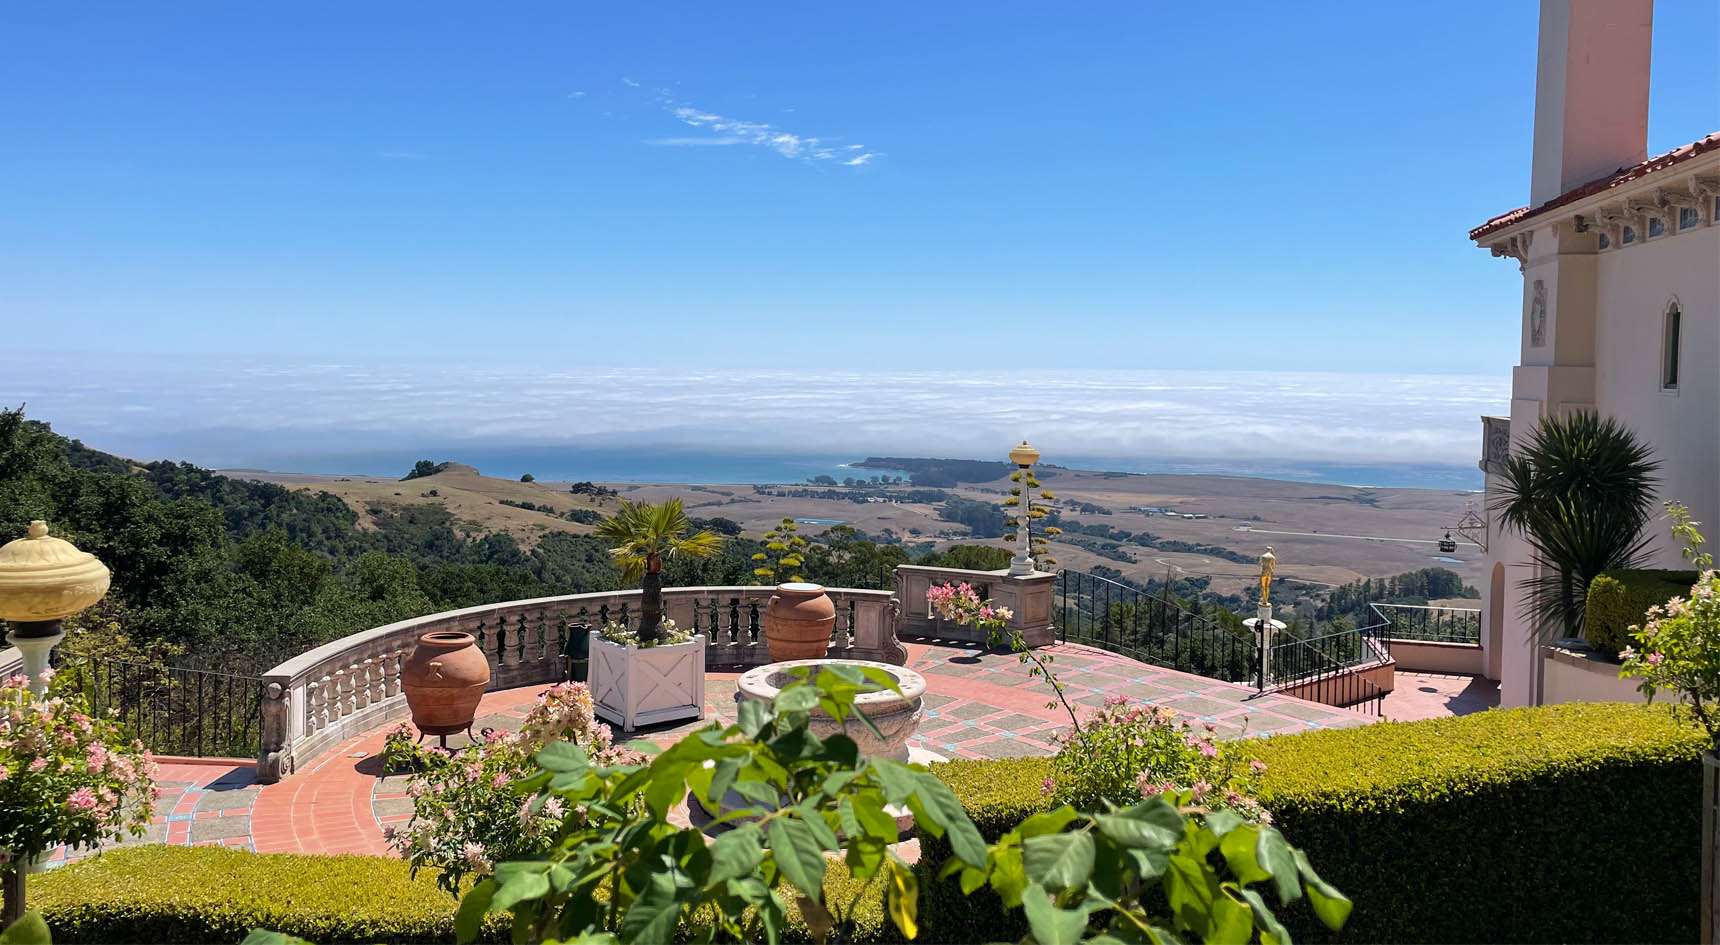 The ocean view from Hearst Castle.